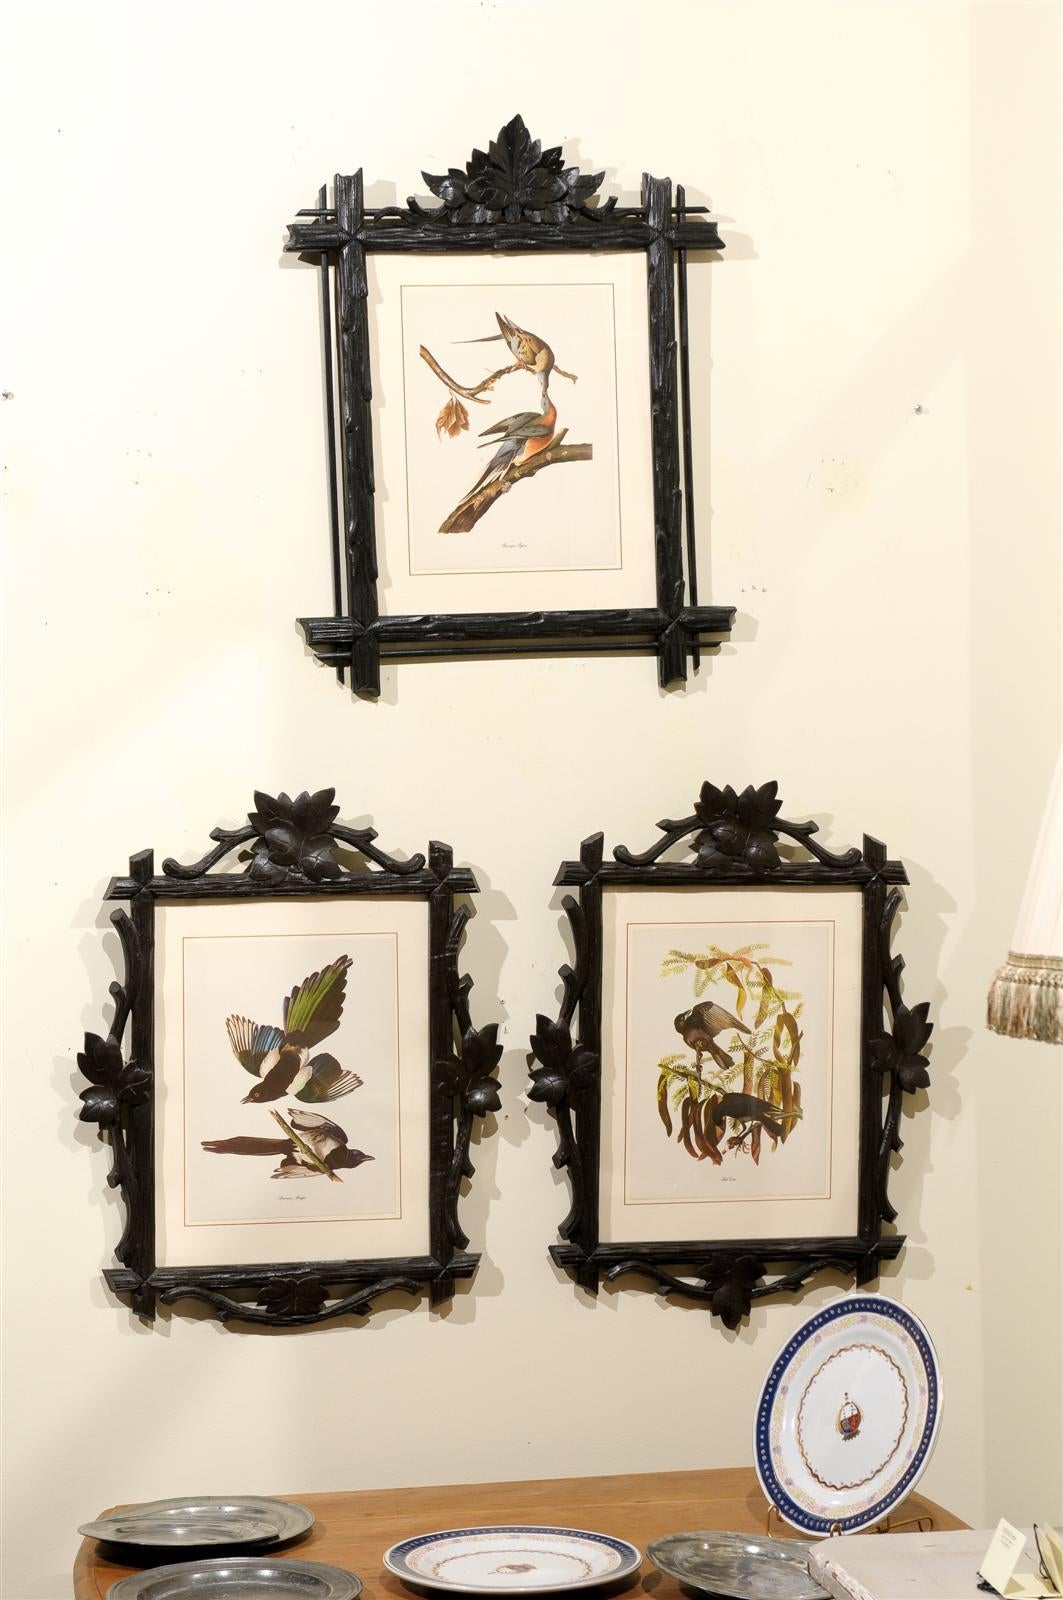 These are three lovely hand carved Black Forest framed bird prints.  The birds in the prints were identified from the Lewis and Clark expedition.  They drawn and colored by Roger Tory Peterson.  The frames and prints can be sold separately or as a